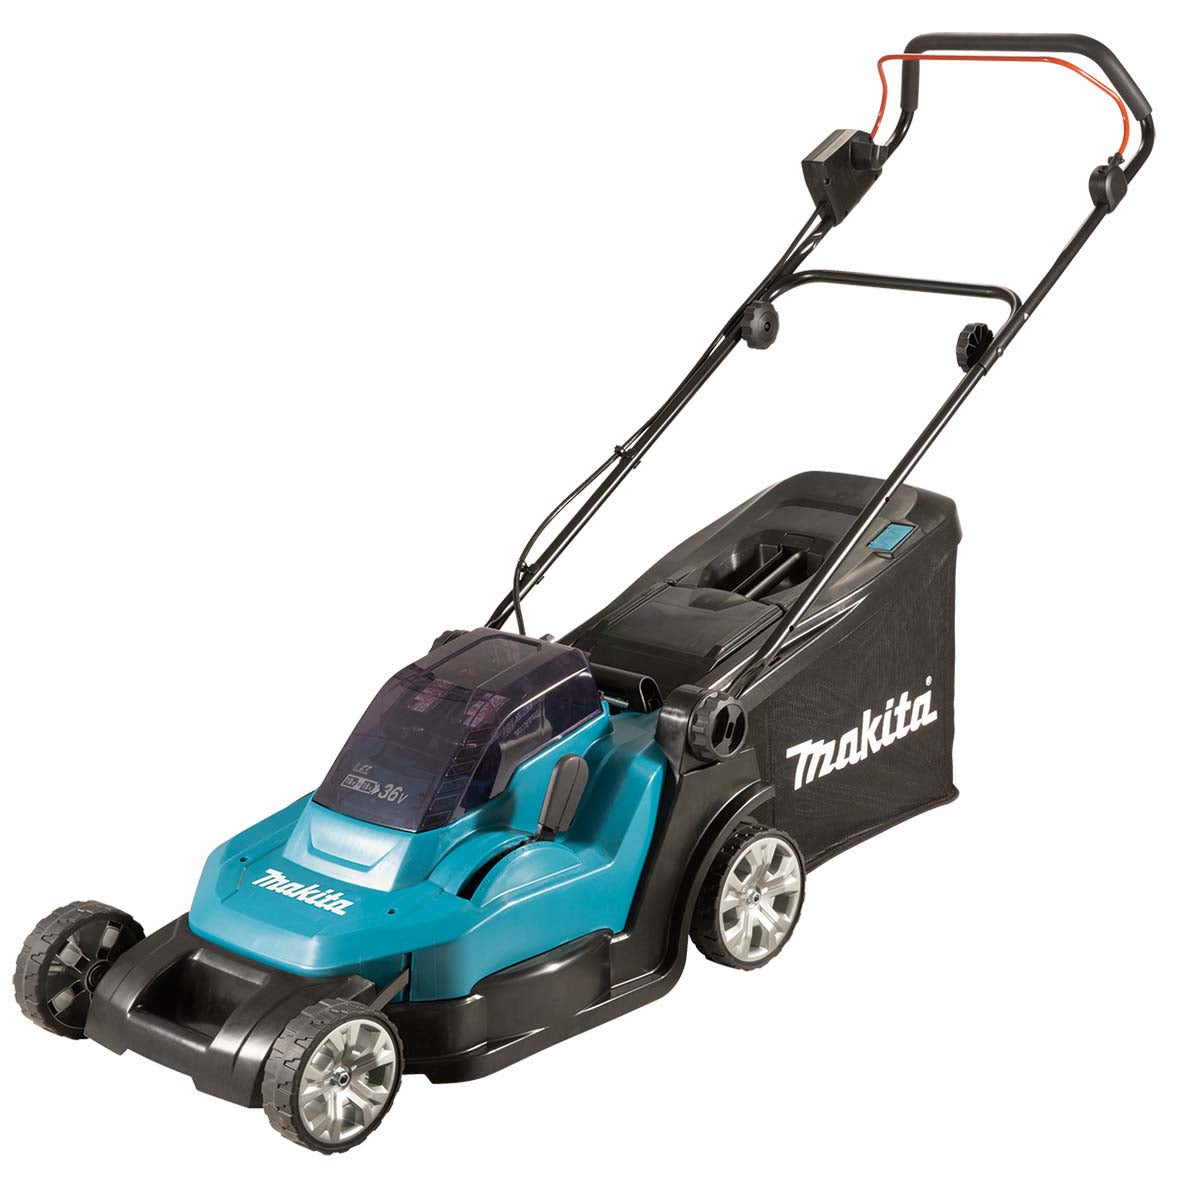 18Vx2 430mm (17") Lawn Mower Bare (Tool Only) DLM432Z by Makita